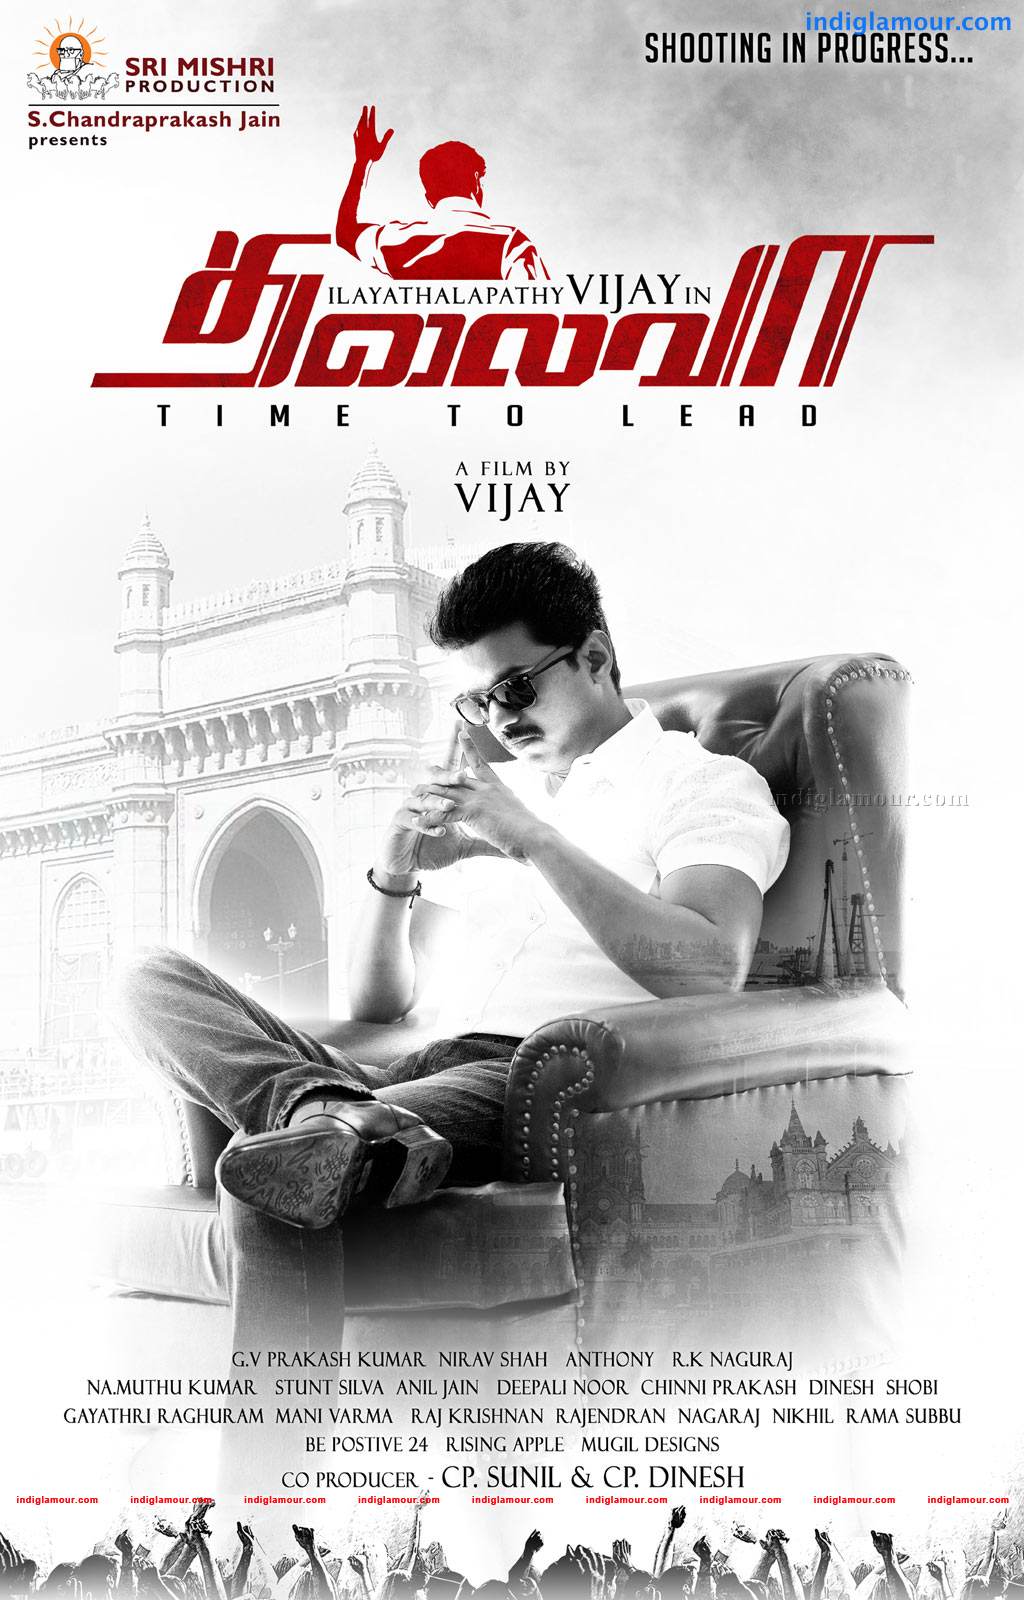 Thalaiva Movie HD photos,images,pics,stills and picture ...